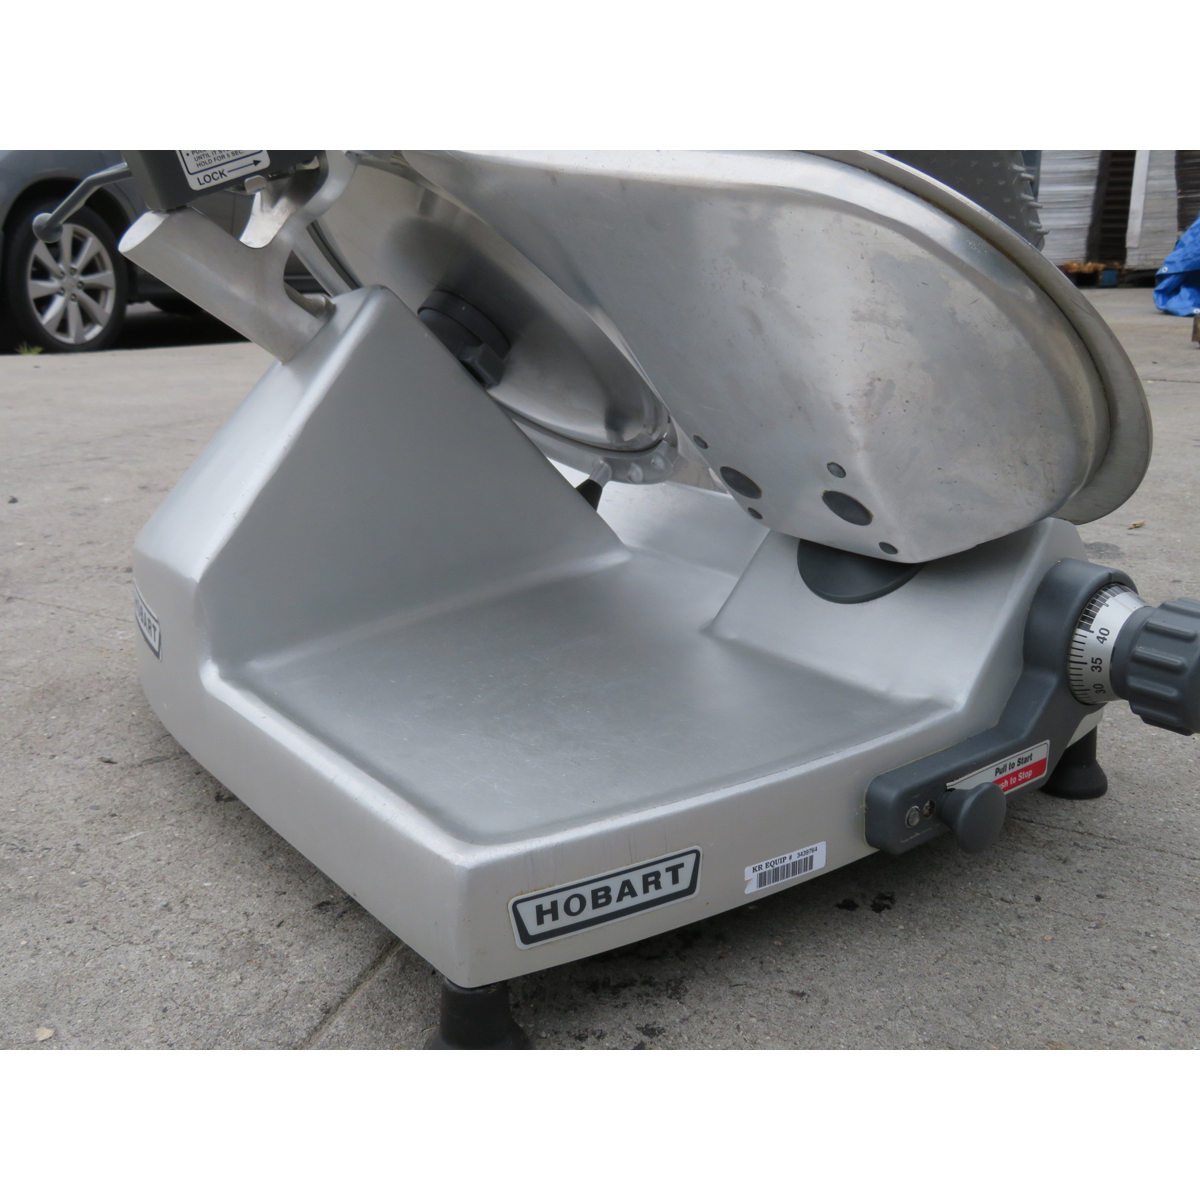 Hobart 2812 120V Manual Meat Slicer 1/2 HP, Used Great Condition image 2